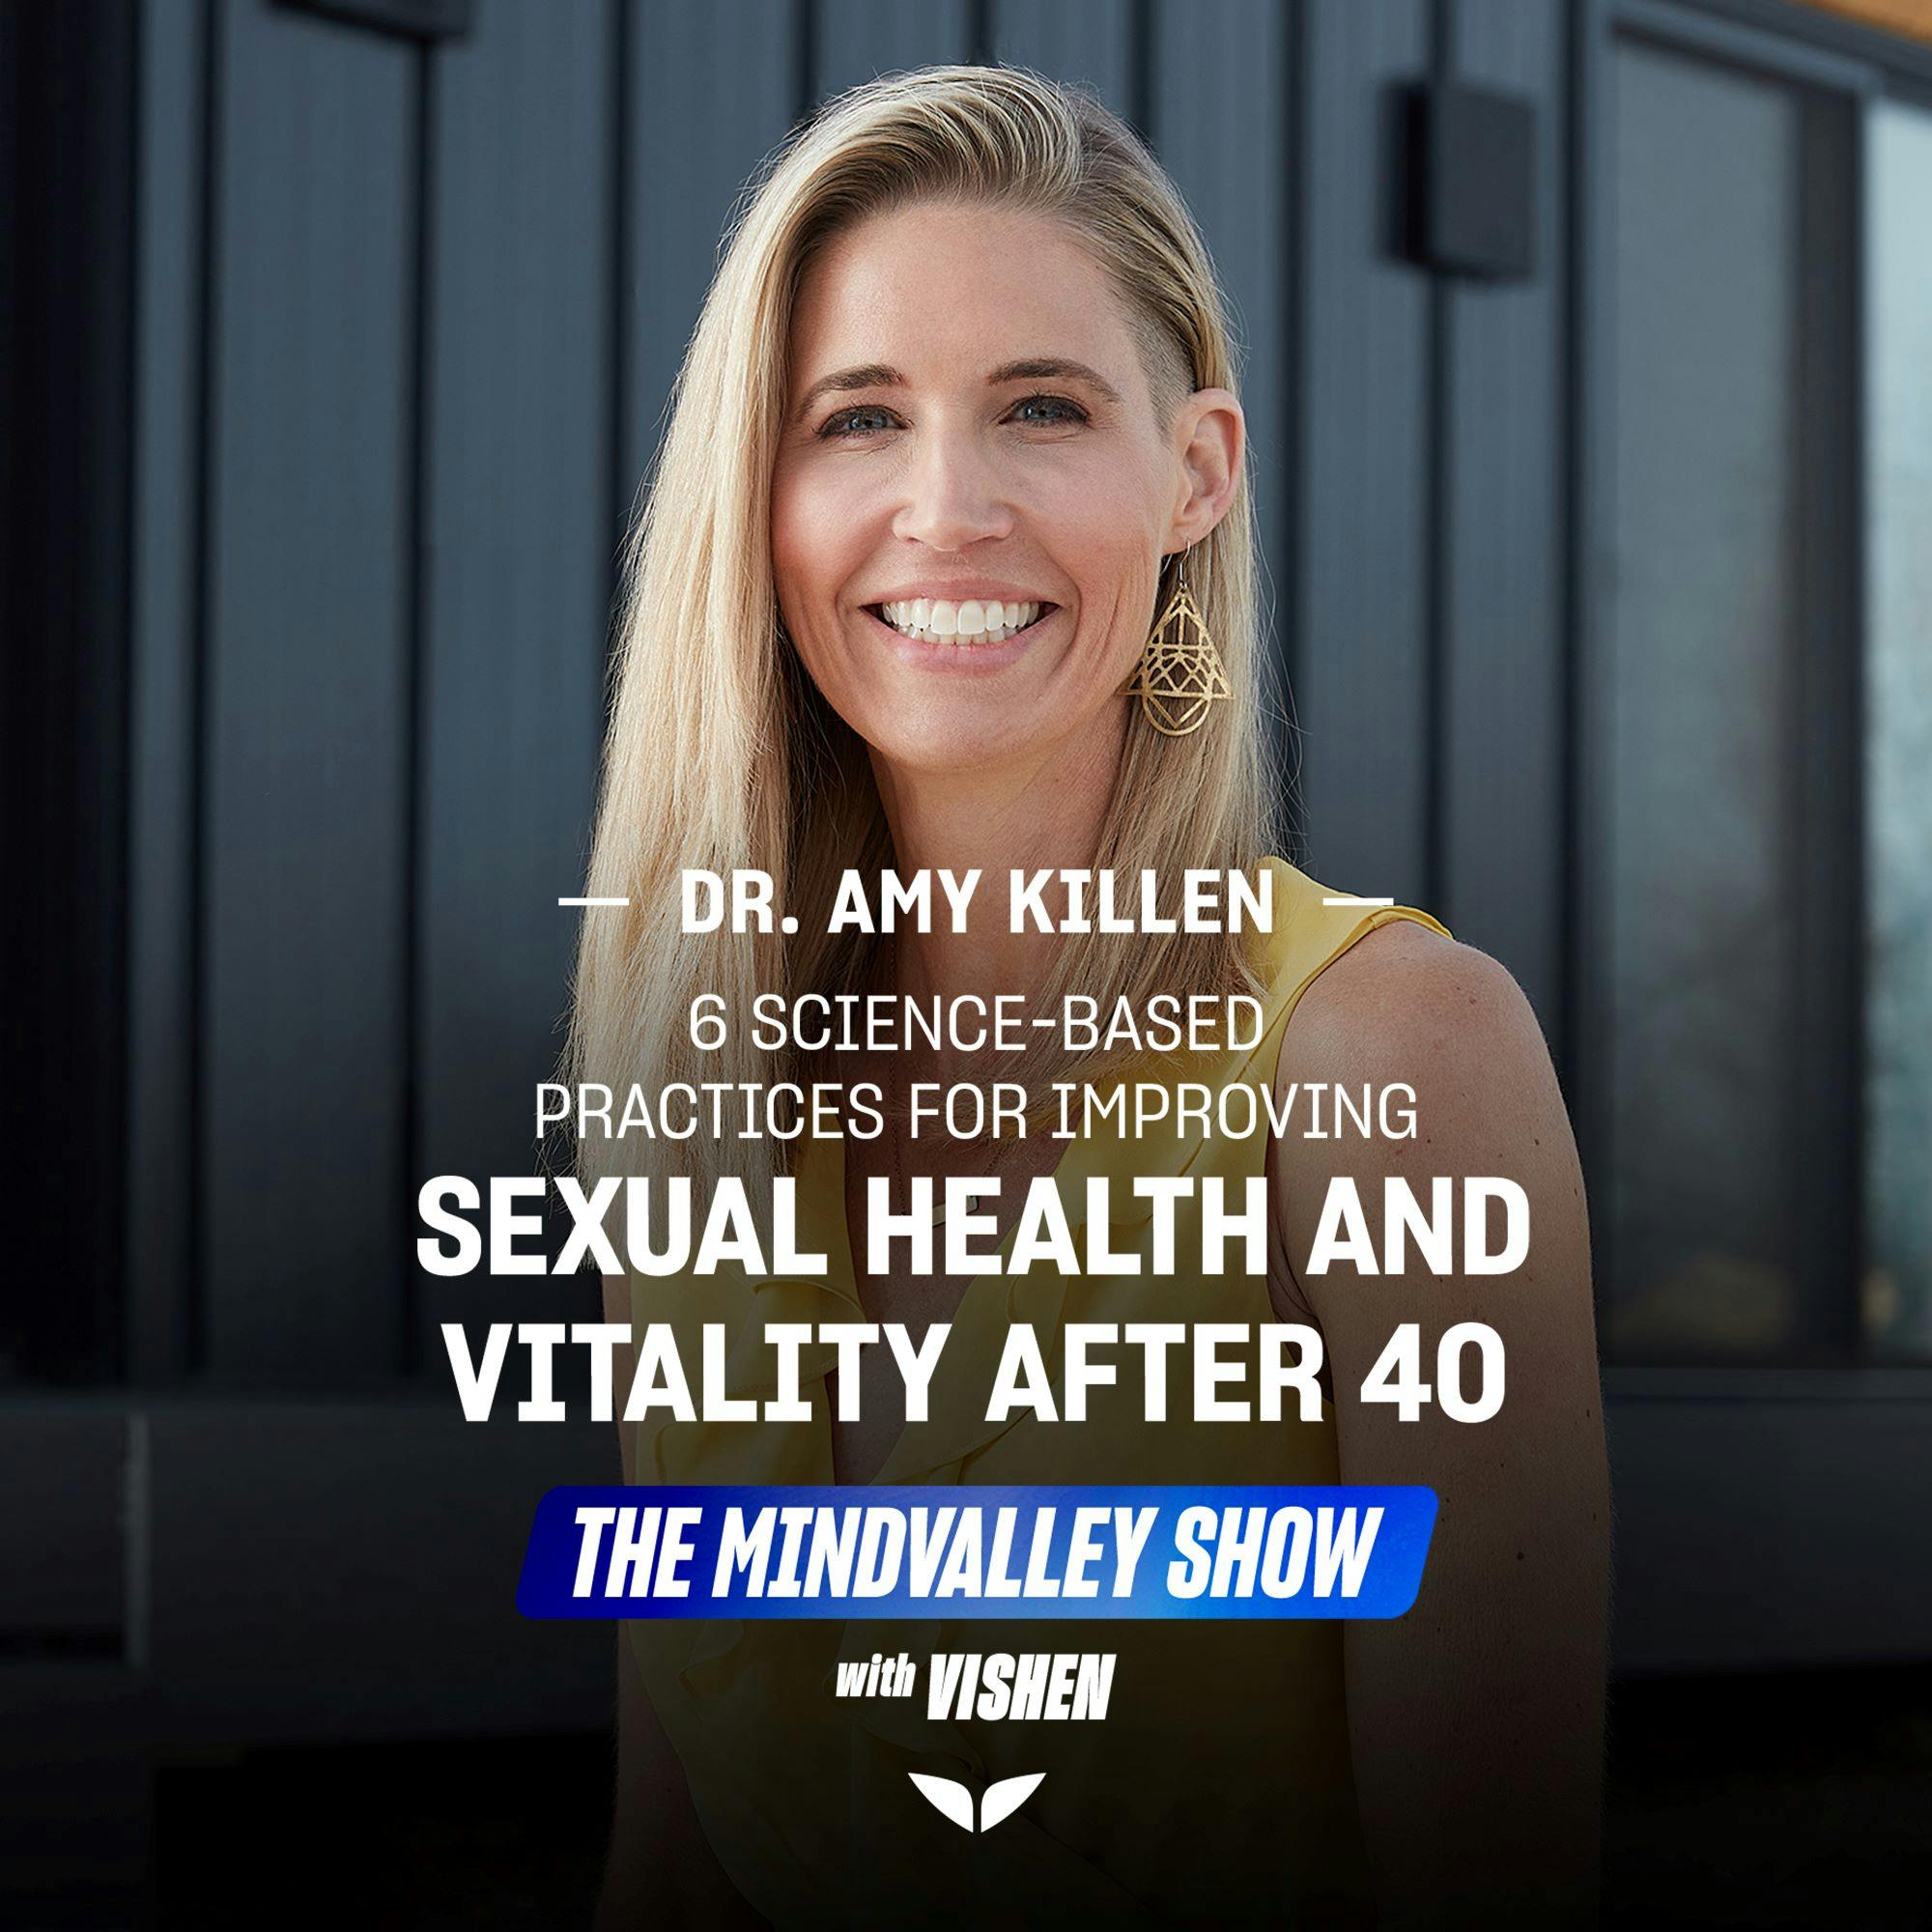 6 Science-Based Practices for Improving Sexual Health and Vitality After 40 | Dr. Amy Killen